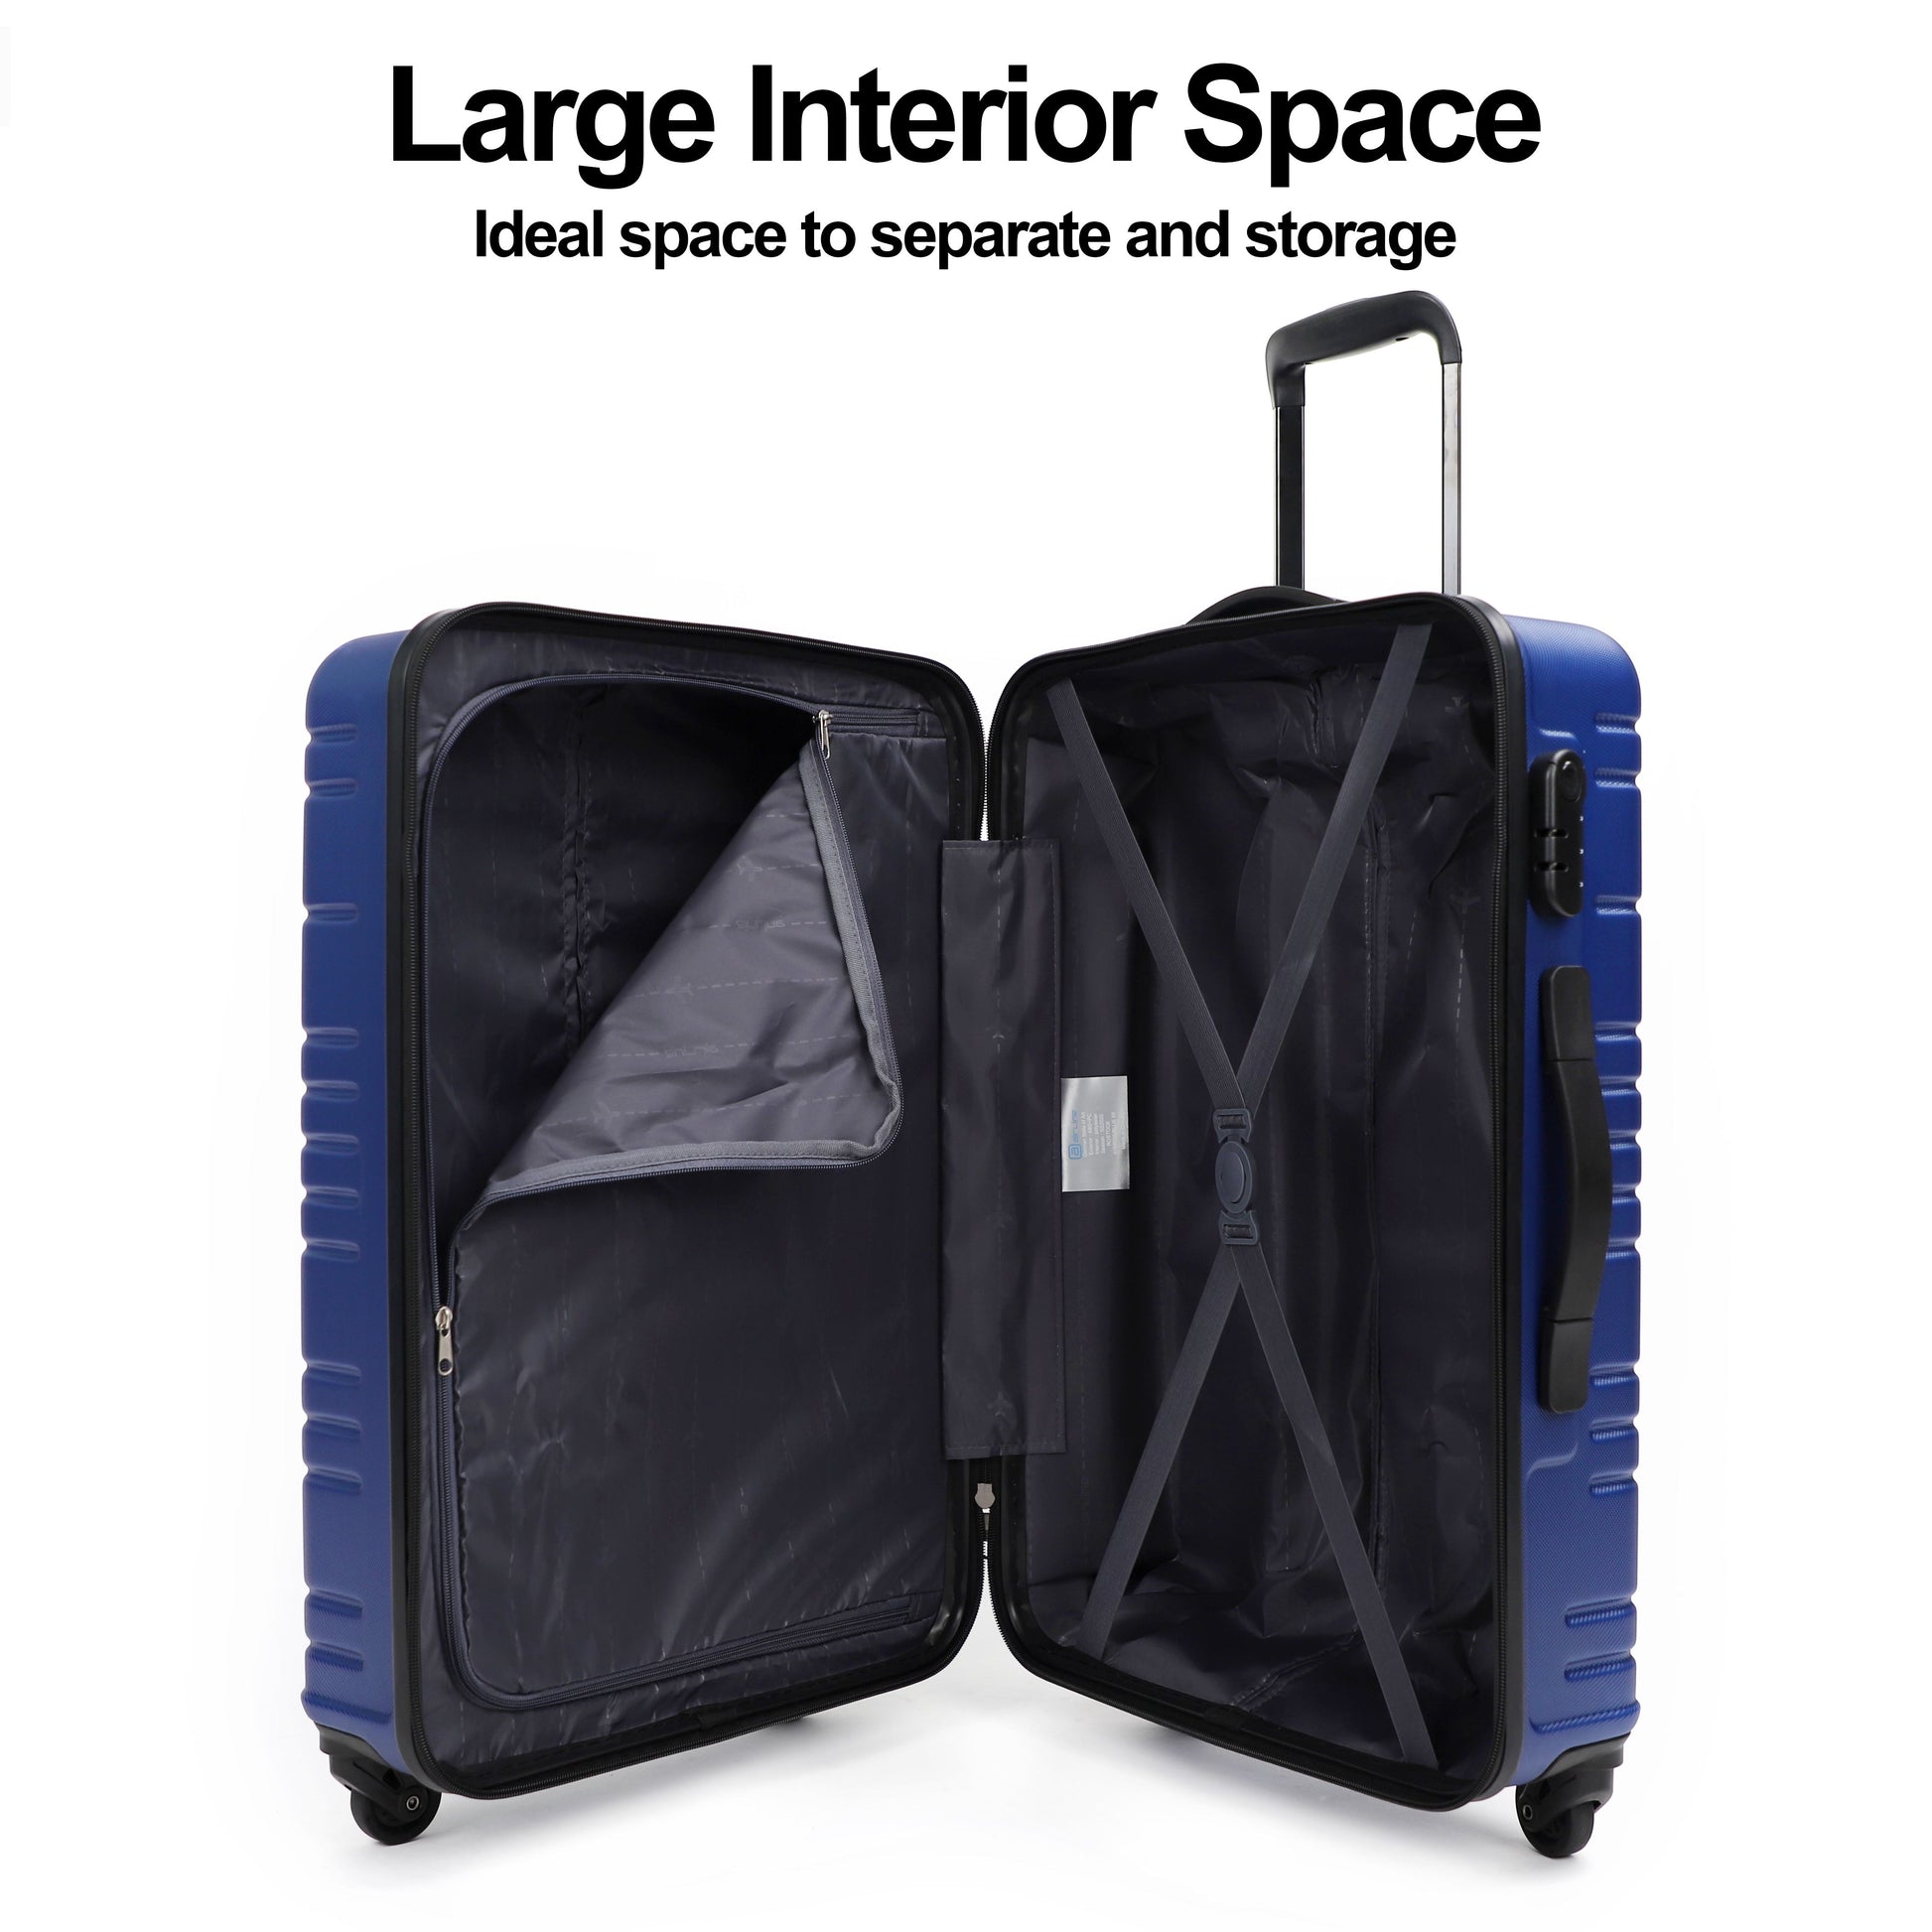 Airline_Luggage_Sets_3peice_Blue_expanded_viewN12721005